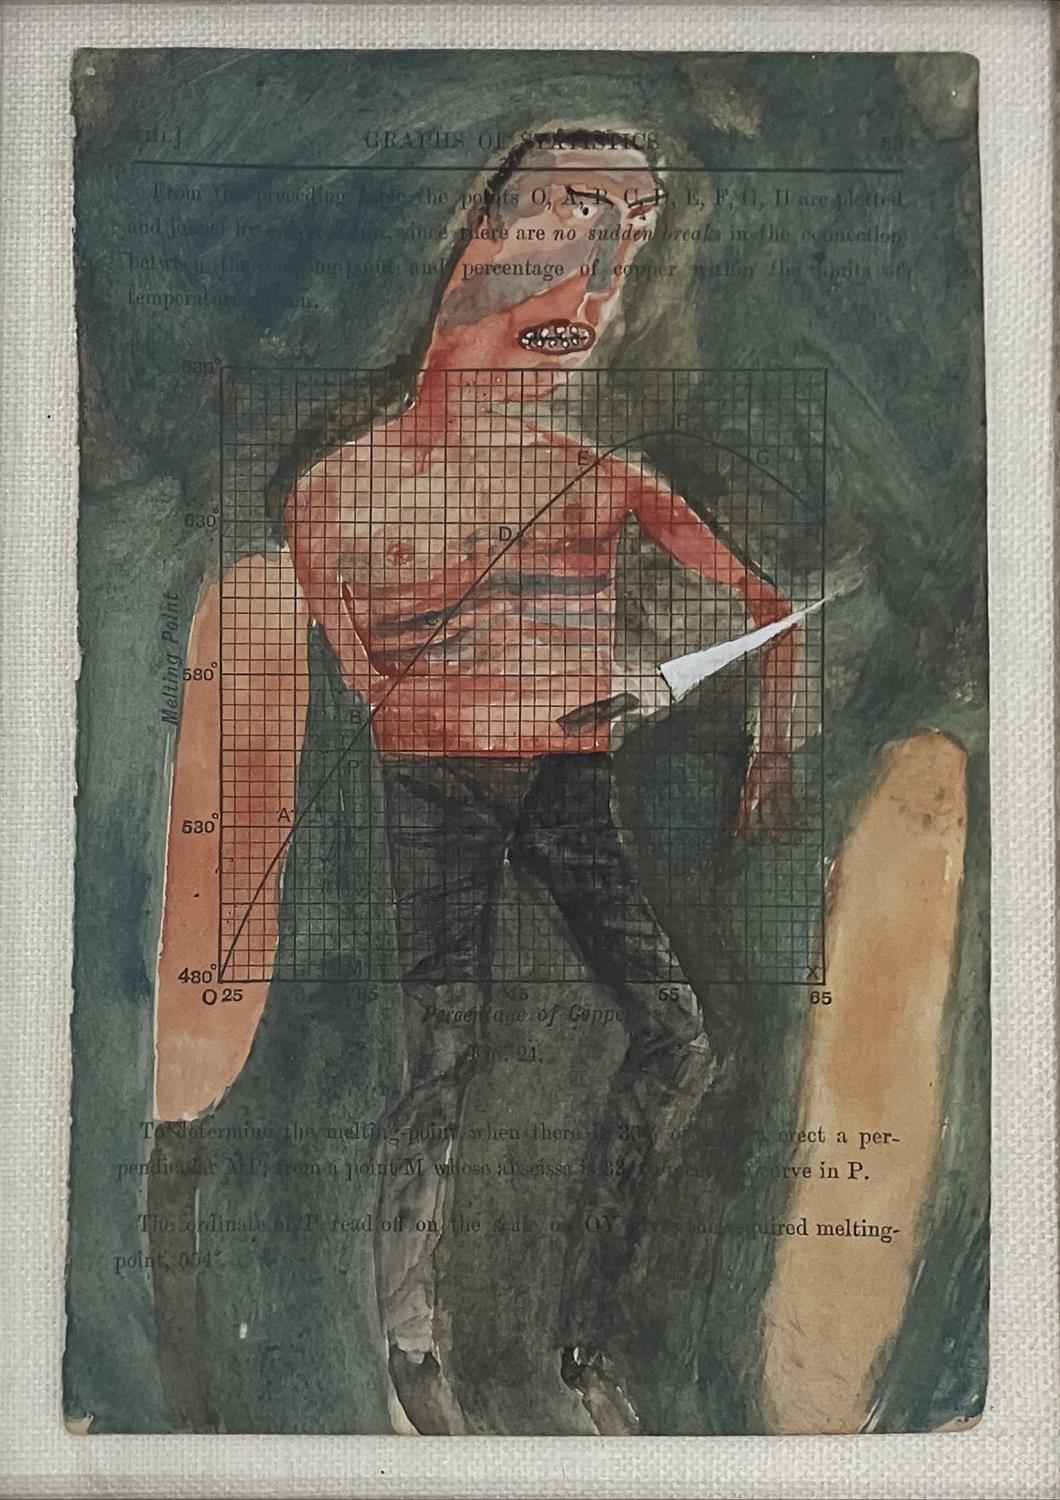 JULIAN DYSON (1936-2003), 'Figure with knife', watercolour on printed page, 18cm x 12cm, framed. - Image 2 of 2